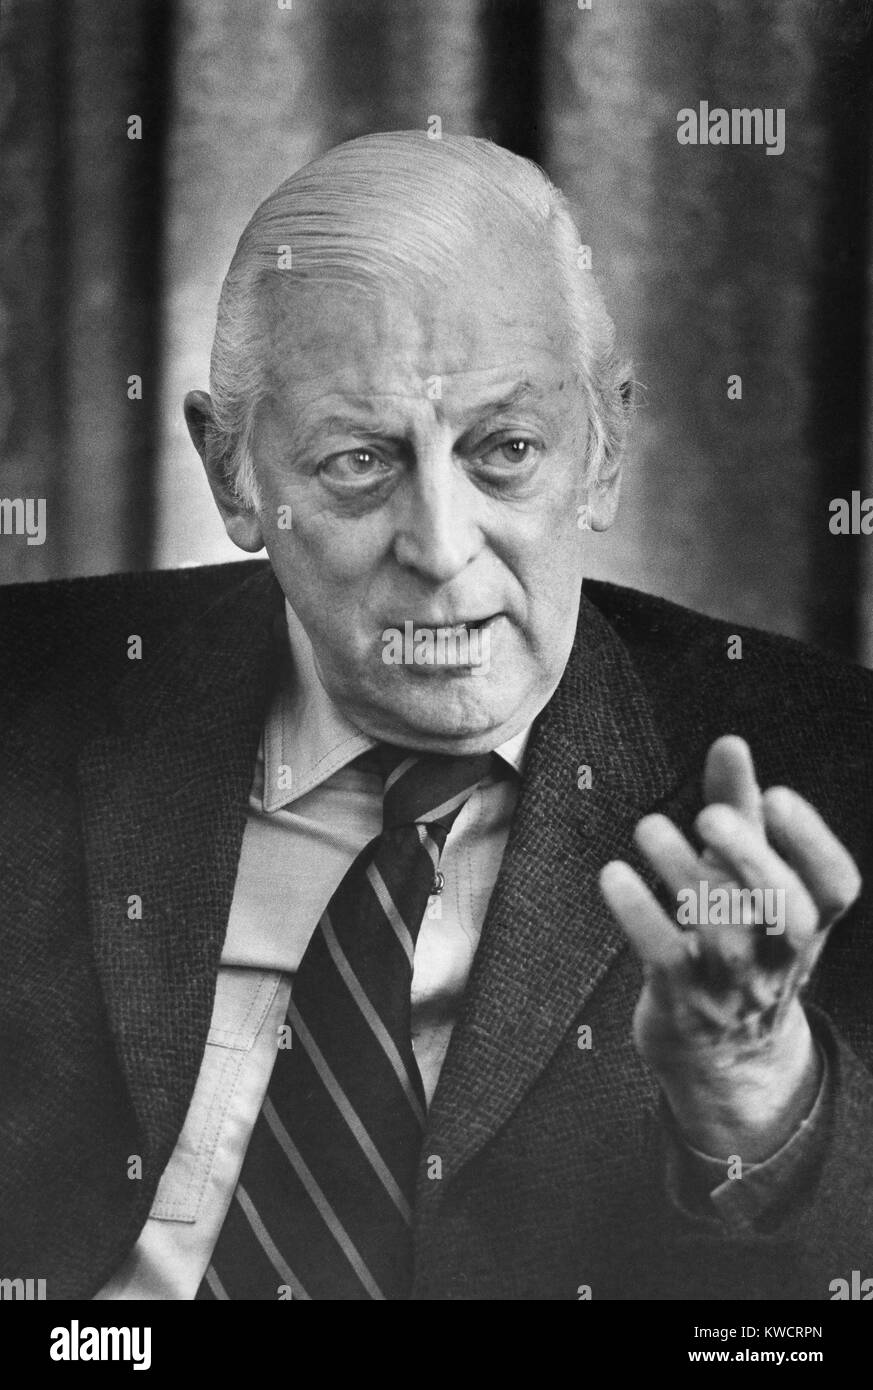 Alistair Cooke, British journalist, television personality, and broadcaster. March 19, 1974. - (BSLOC 2015 1 27) Stock Photo